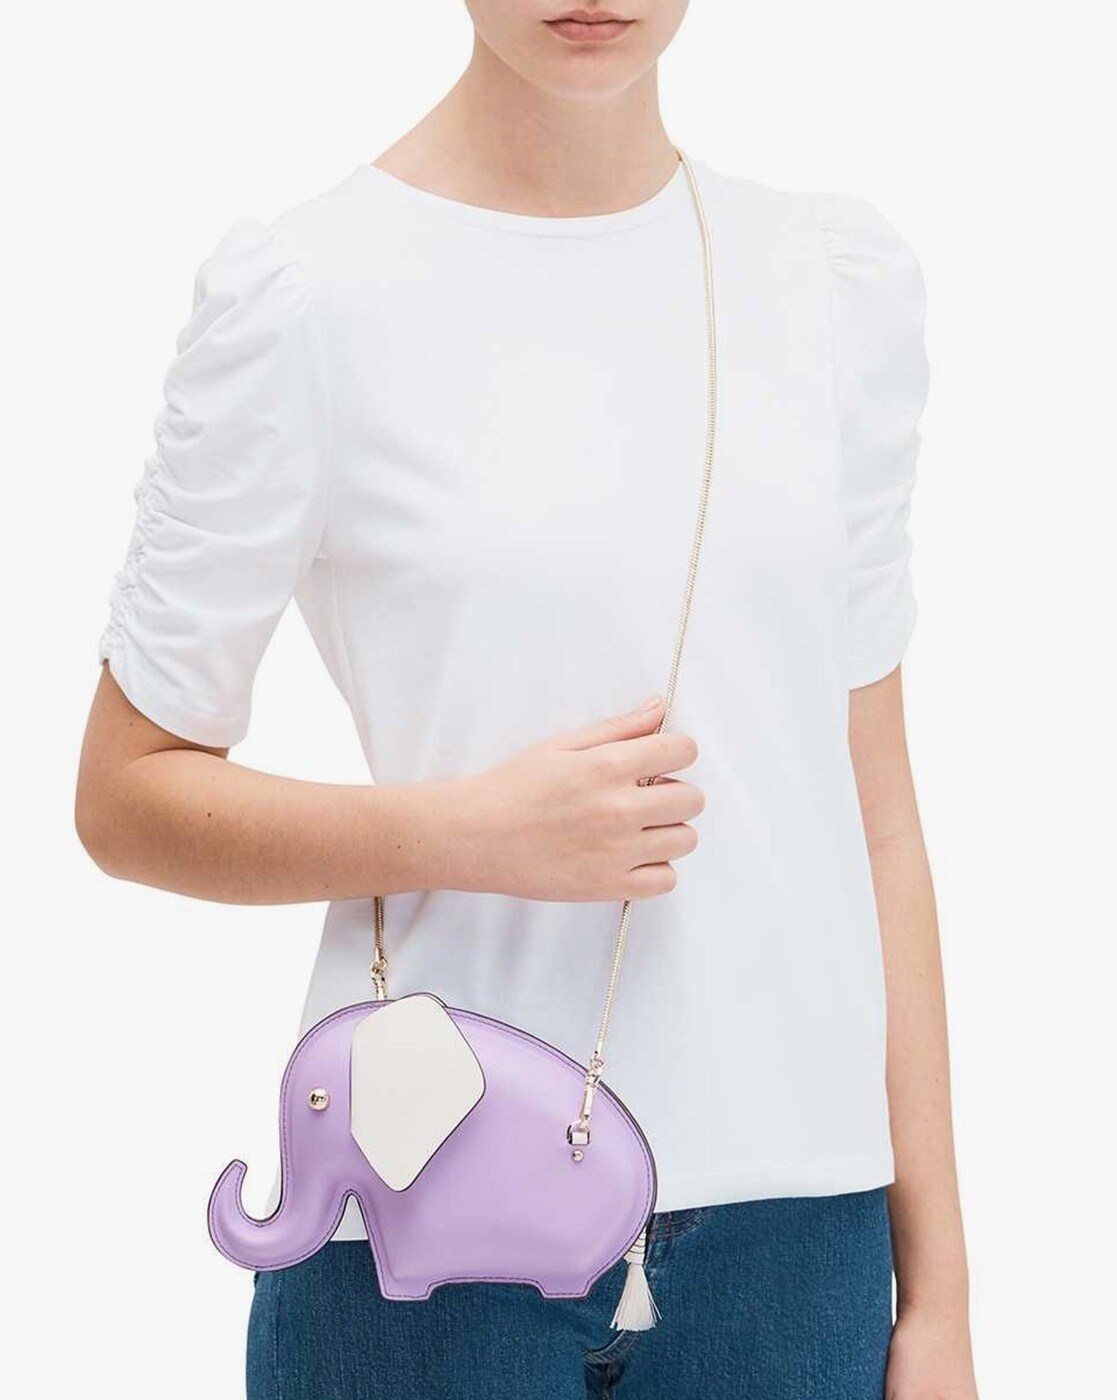 Chala Rabbit Collection: Wallet, Key Chain, Totes and Crossbody Bag for  Bunny Lovers | Animal Lover Gifts – The Pink Pigs